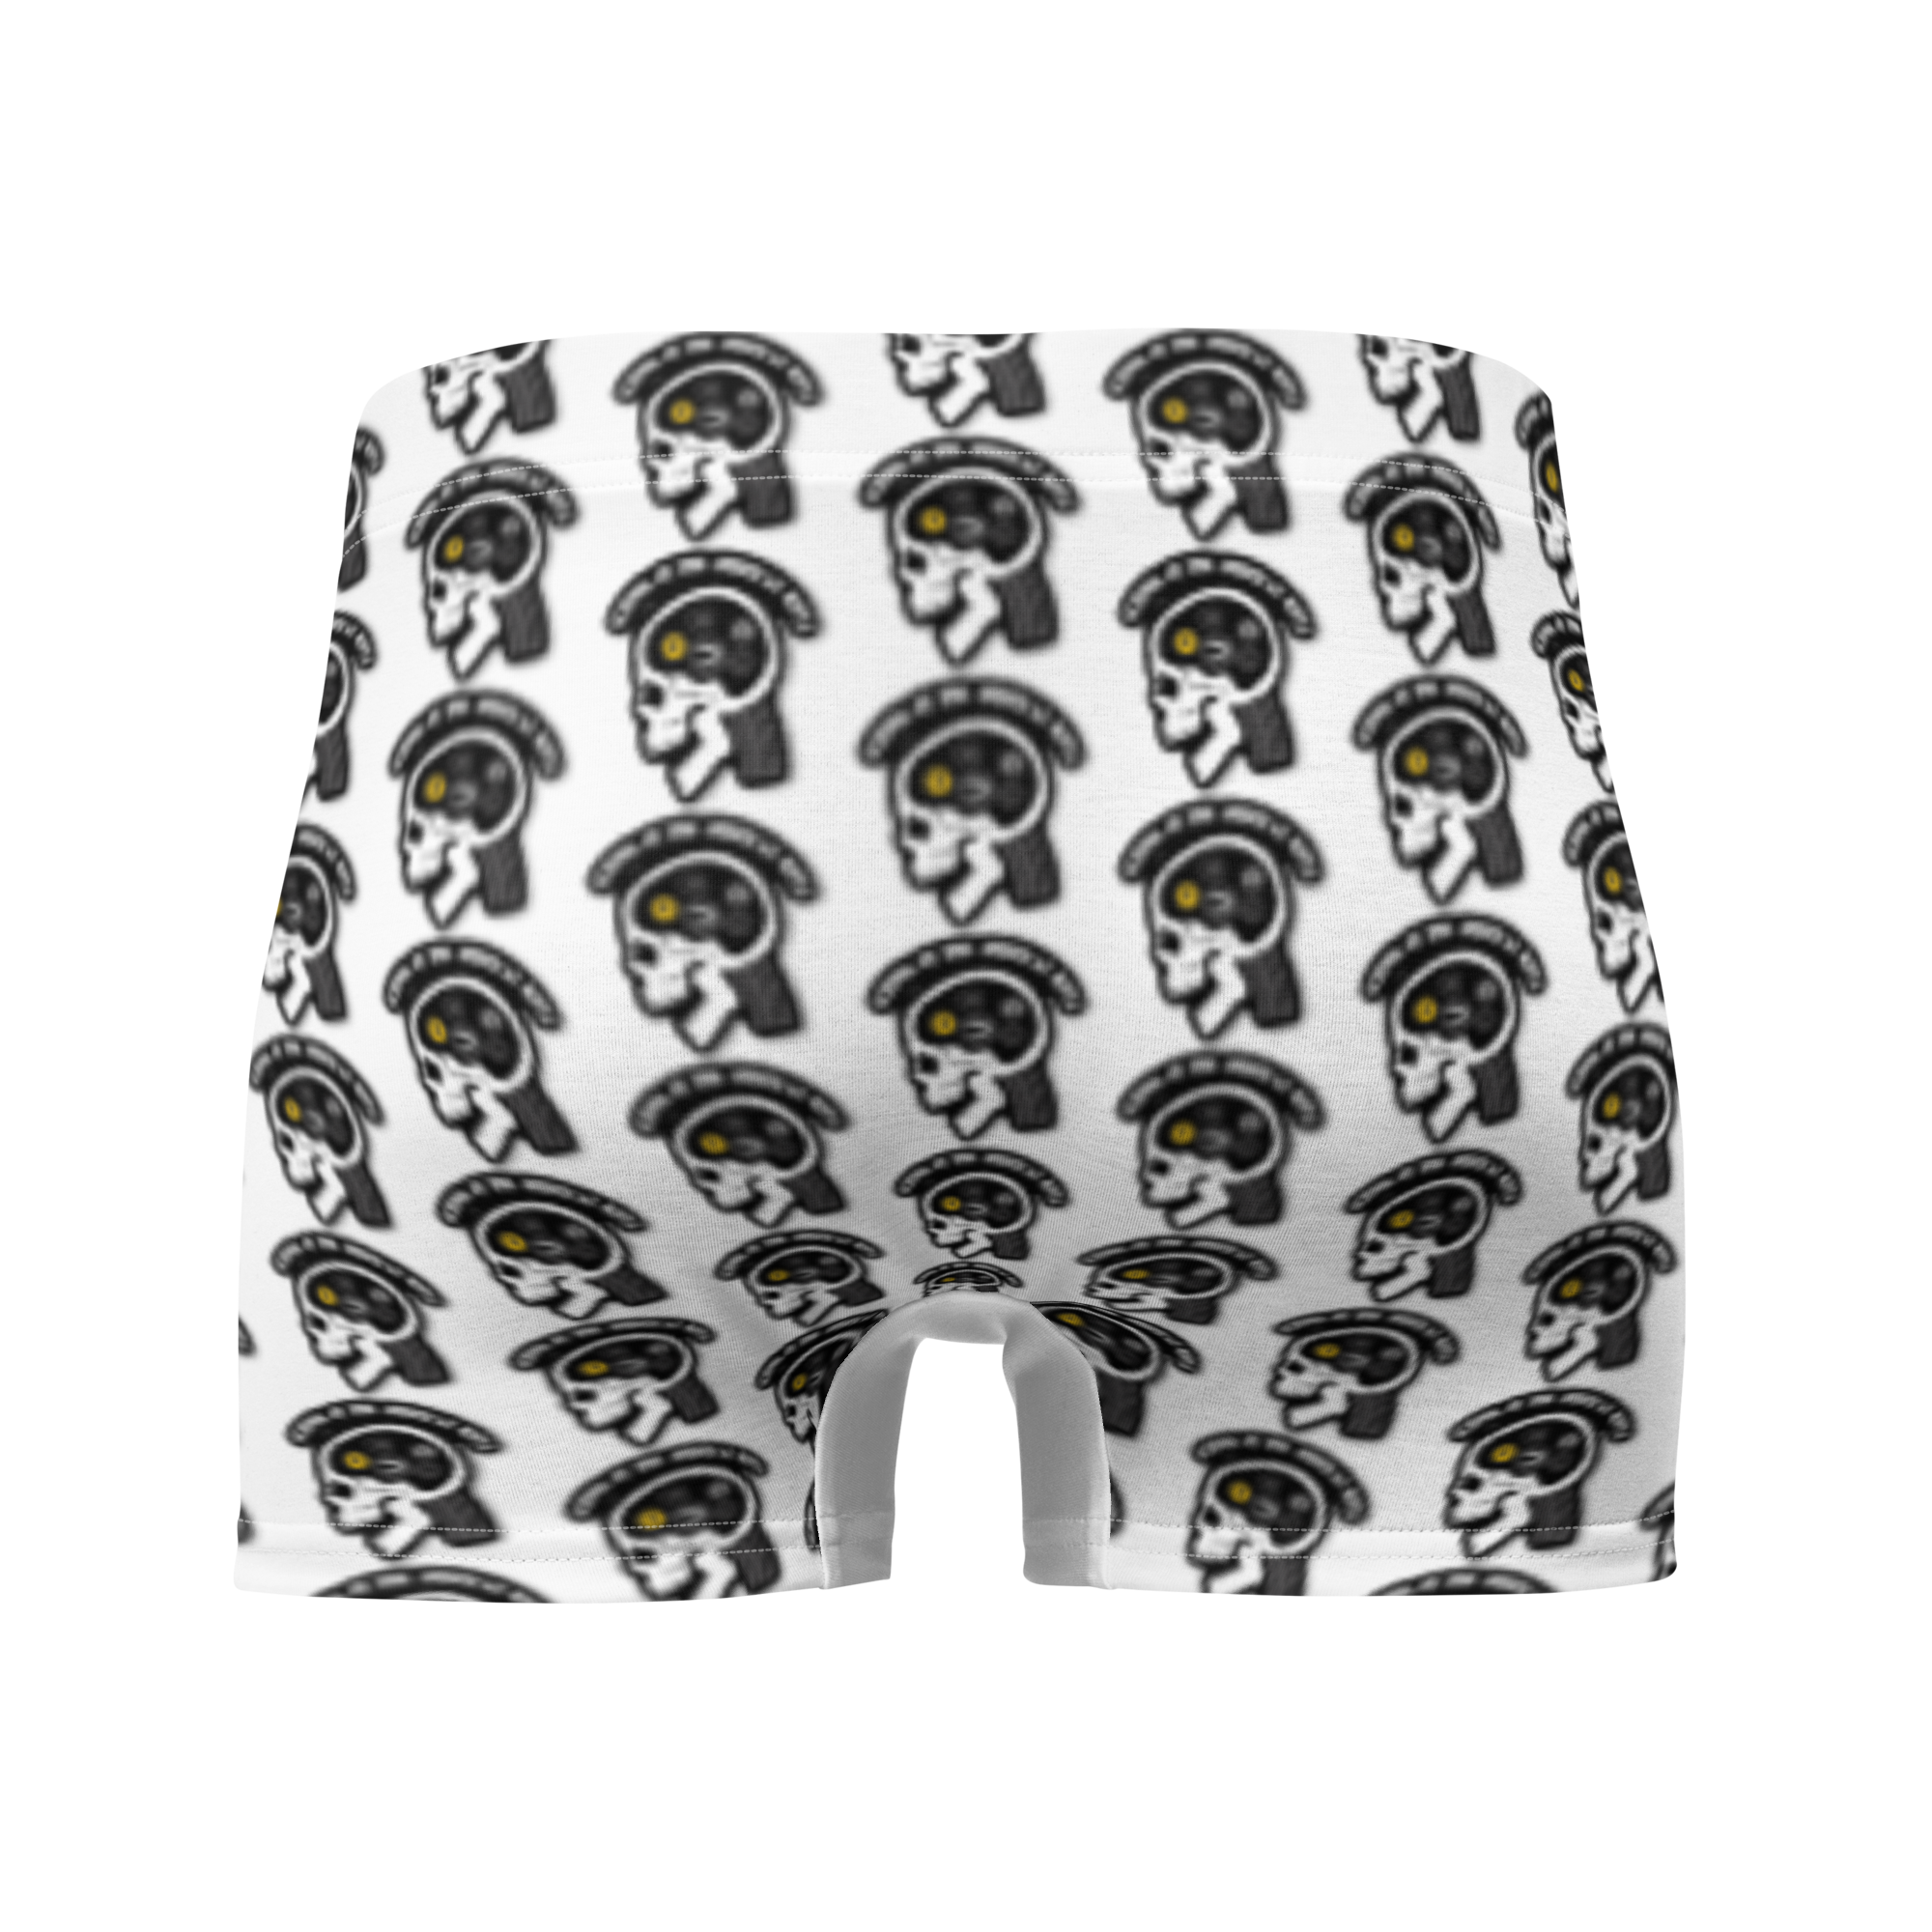 A pair of SOTAR "Gauge This" Boxer Briefs with a skull and crossbones pattern.